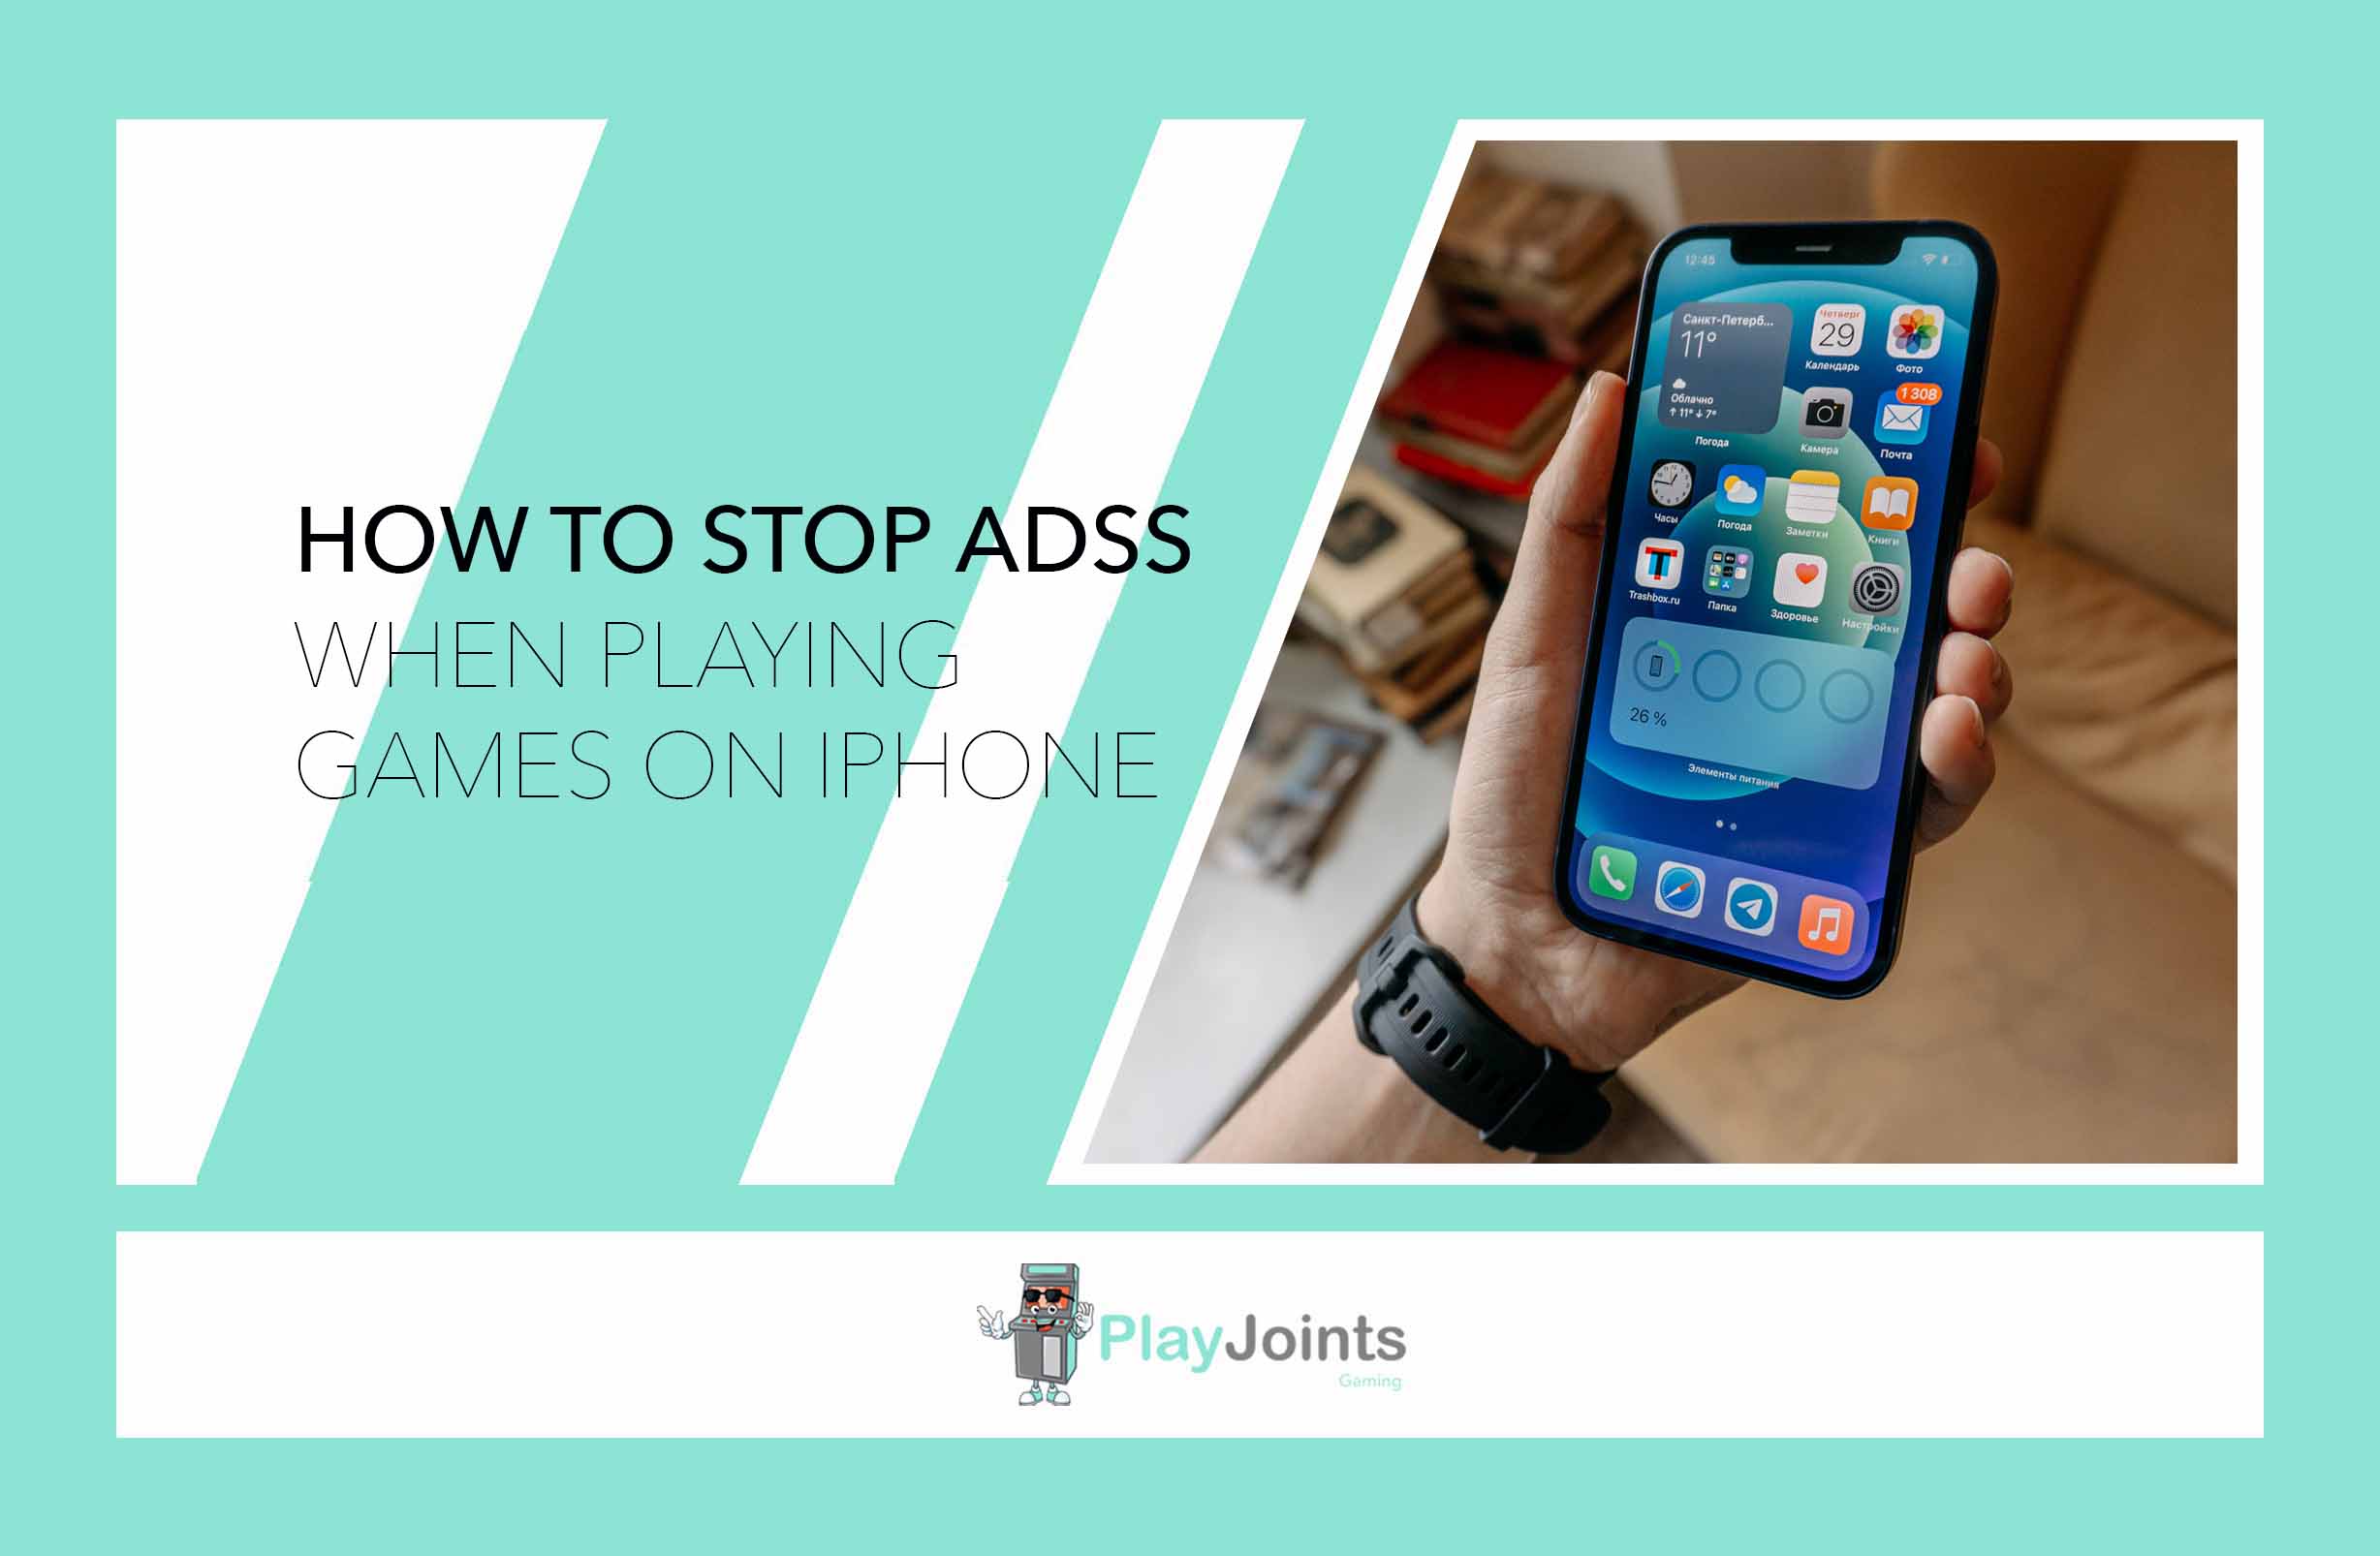 How to Stop Ads When Playing Games on iPhone